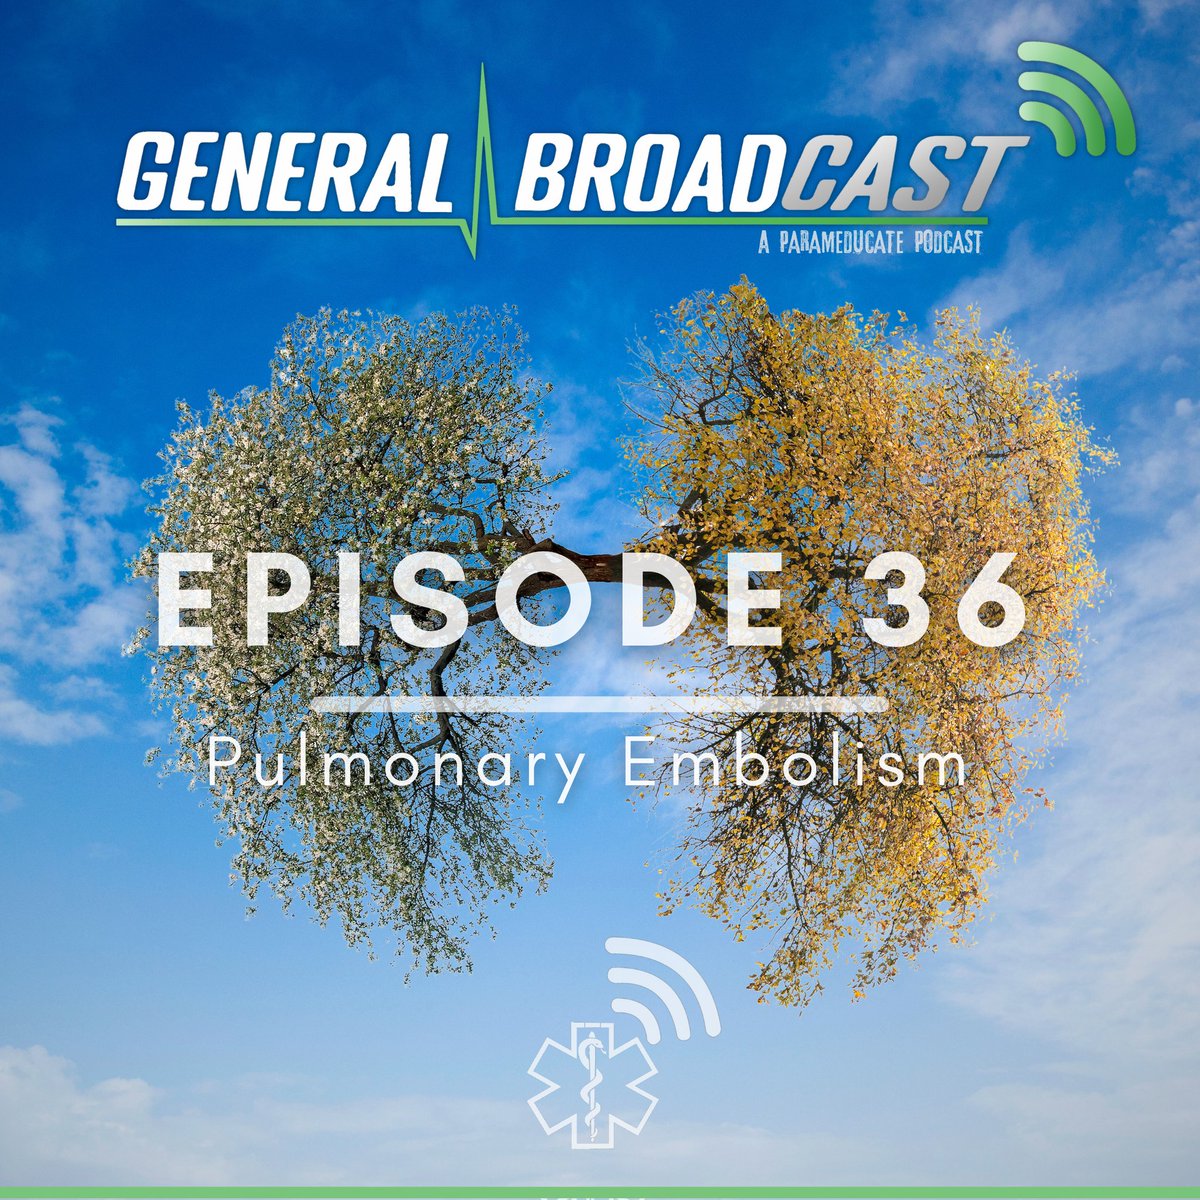 Our episode on Pulmonary Embolism is out now! This is one of the most commonly missed diagnoses in emergency medicine, so it's never a bad time to brush up on your knowledge! Let us know what you think with a RT and share our #FOAMed with others. #PE #MedEd #medicaleducation